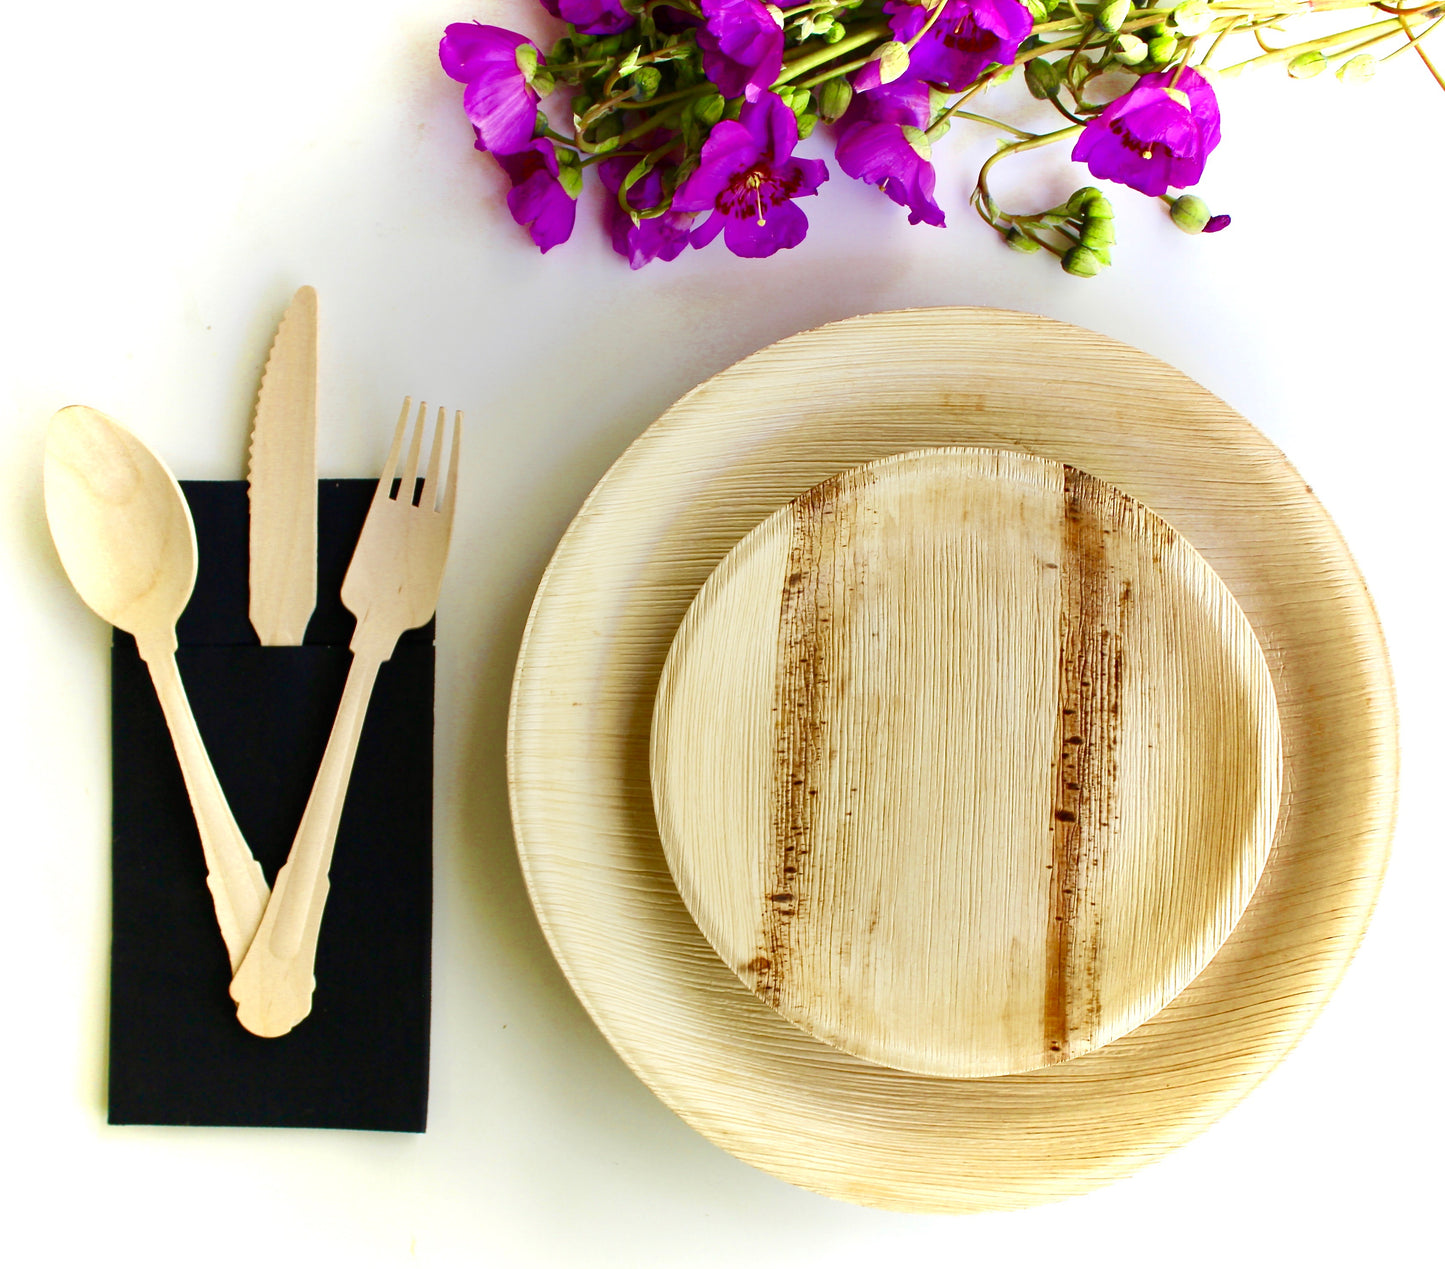 Disposable palm leaf fsquer plate Natural Sustainable 25 pices 10" round 25 pic 8" Round 25 pic bowl and 75 pic wooden Brich cutlery